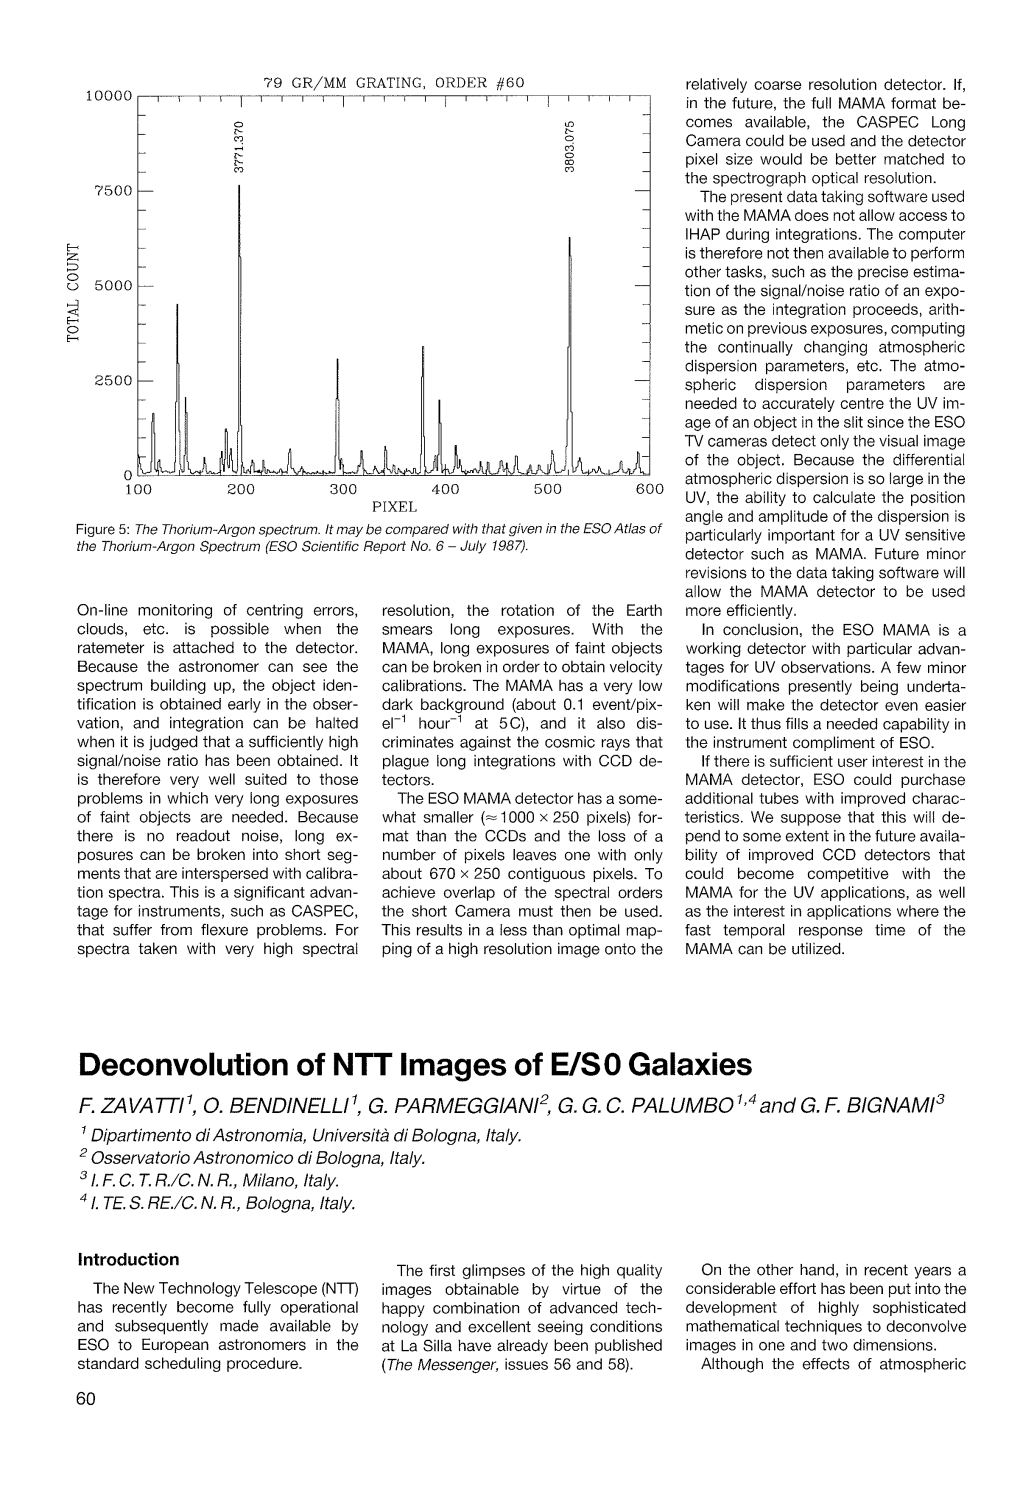 Deconvolution of NTT Images of EISO Galaxies F